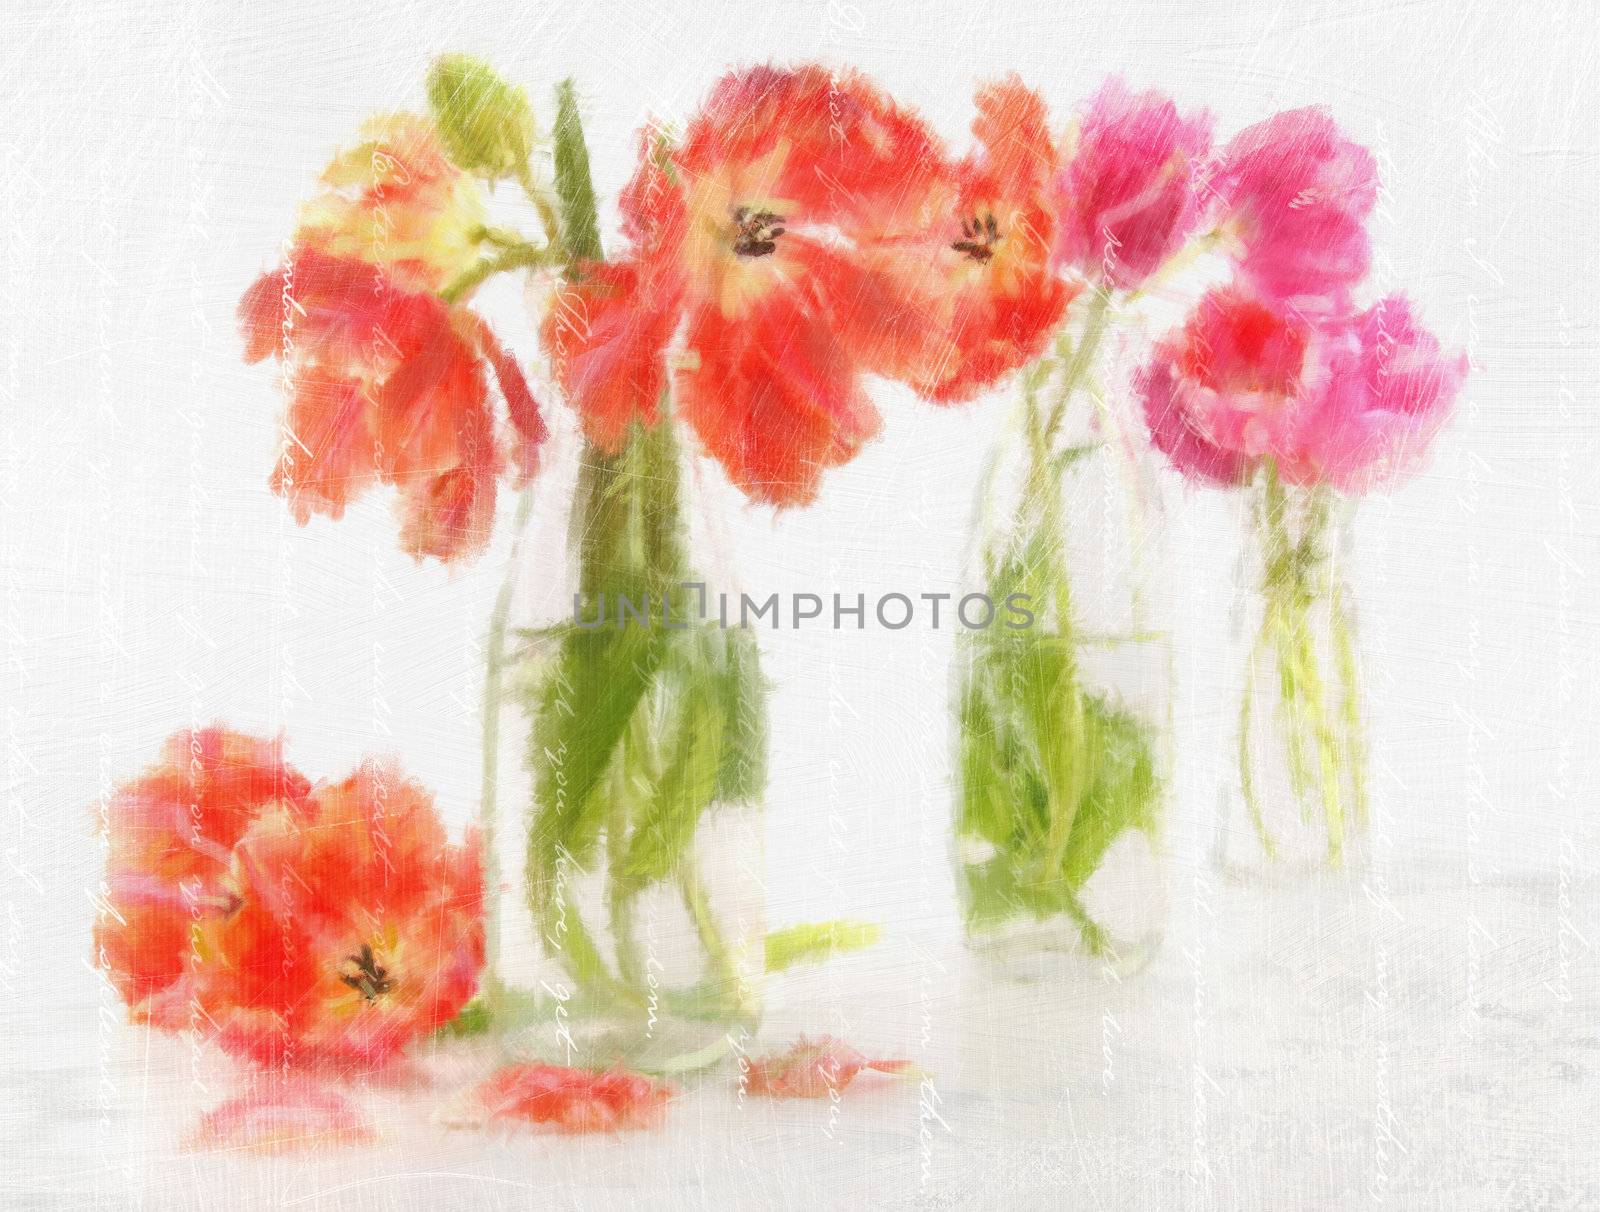 Digital watercolor of colorful  tulips in bottles by Sandralise